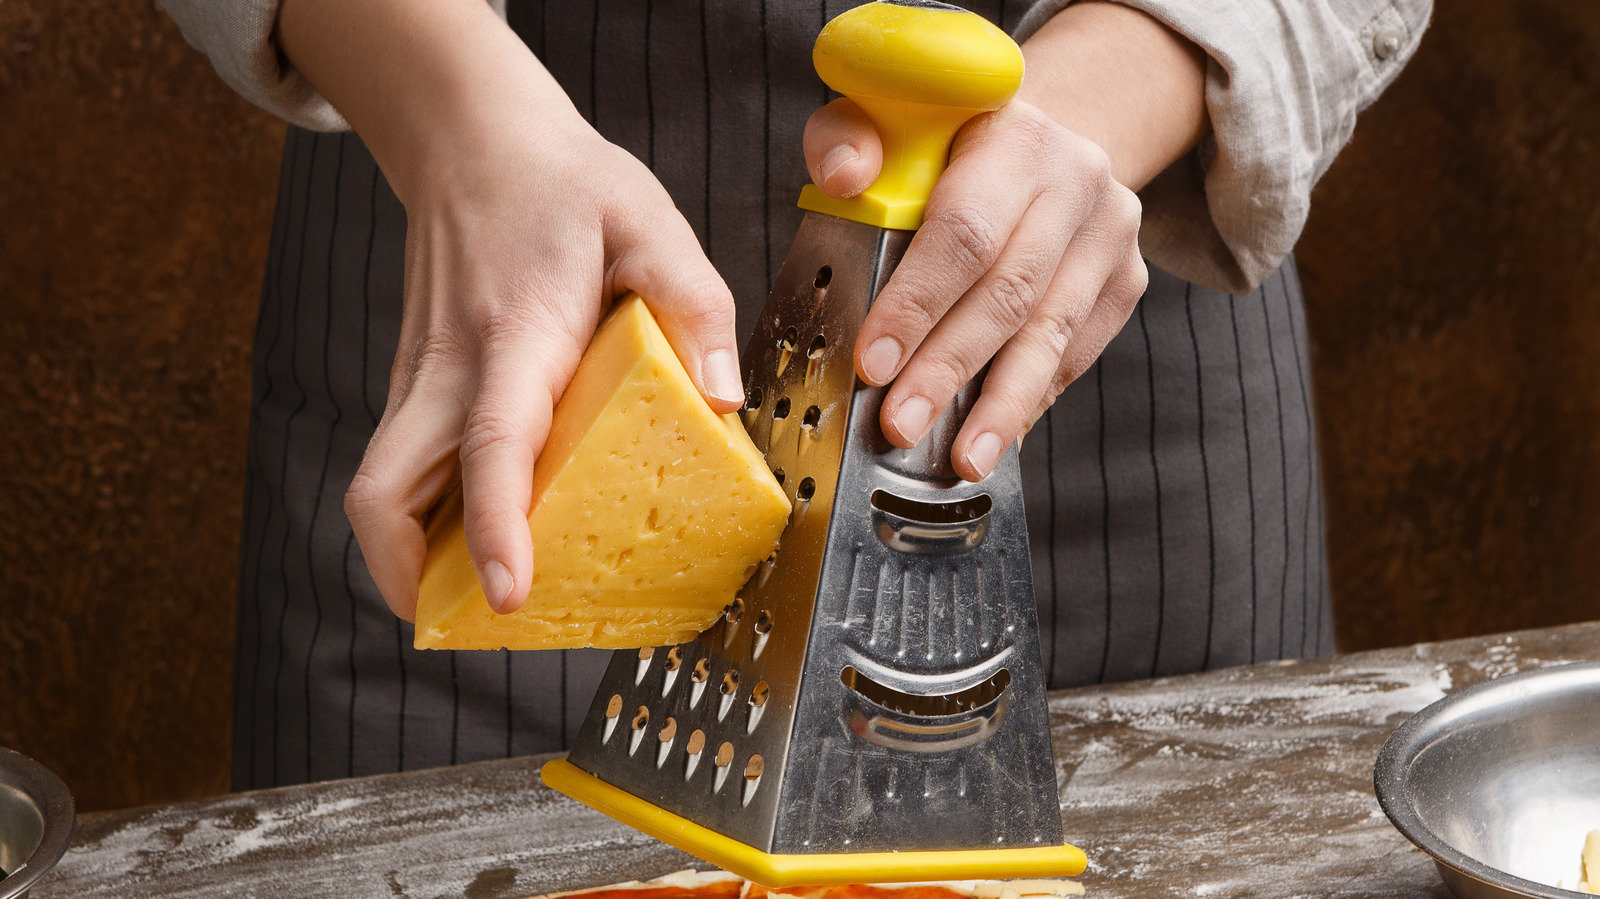 https://www.tastingtable.com/img/gallery/the-trick-to-cleaning-your-cheese-grater-with-a-lemon/l-intro-1642183095.jpg